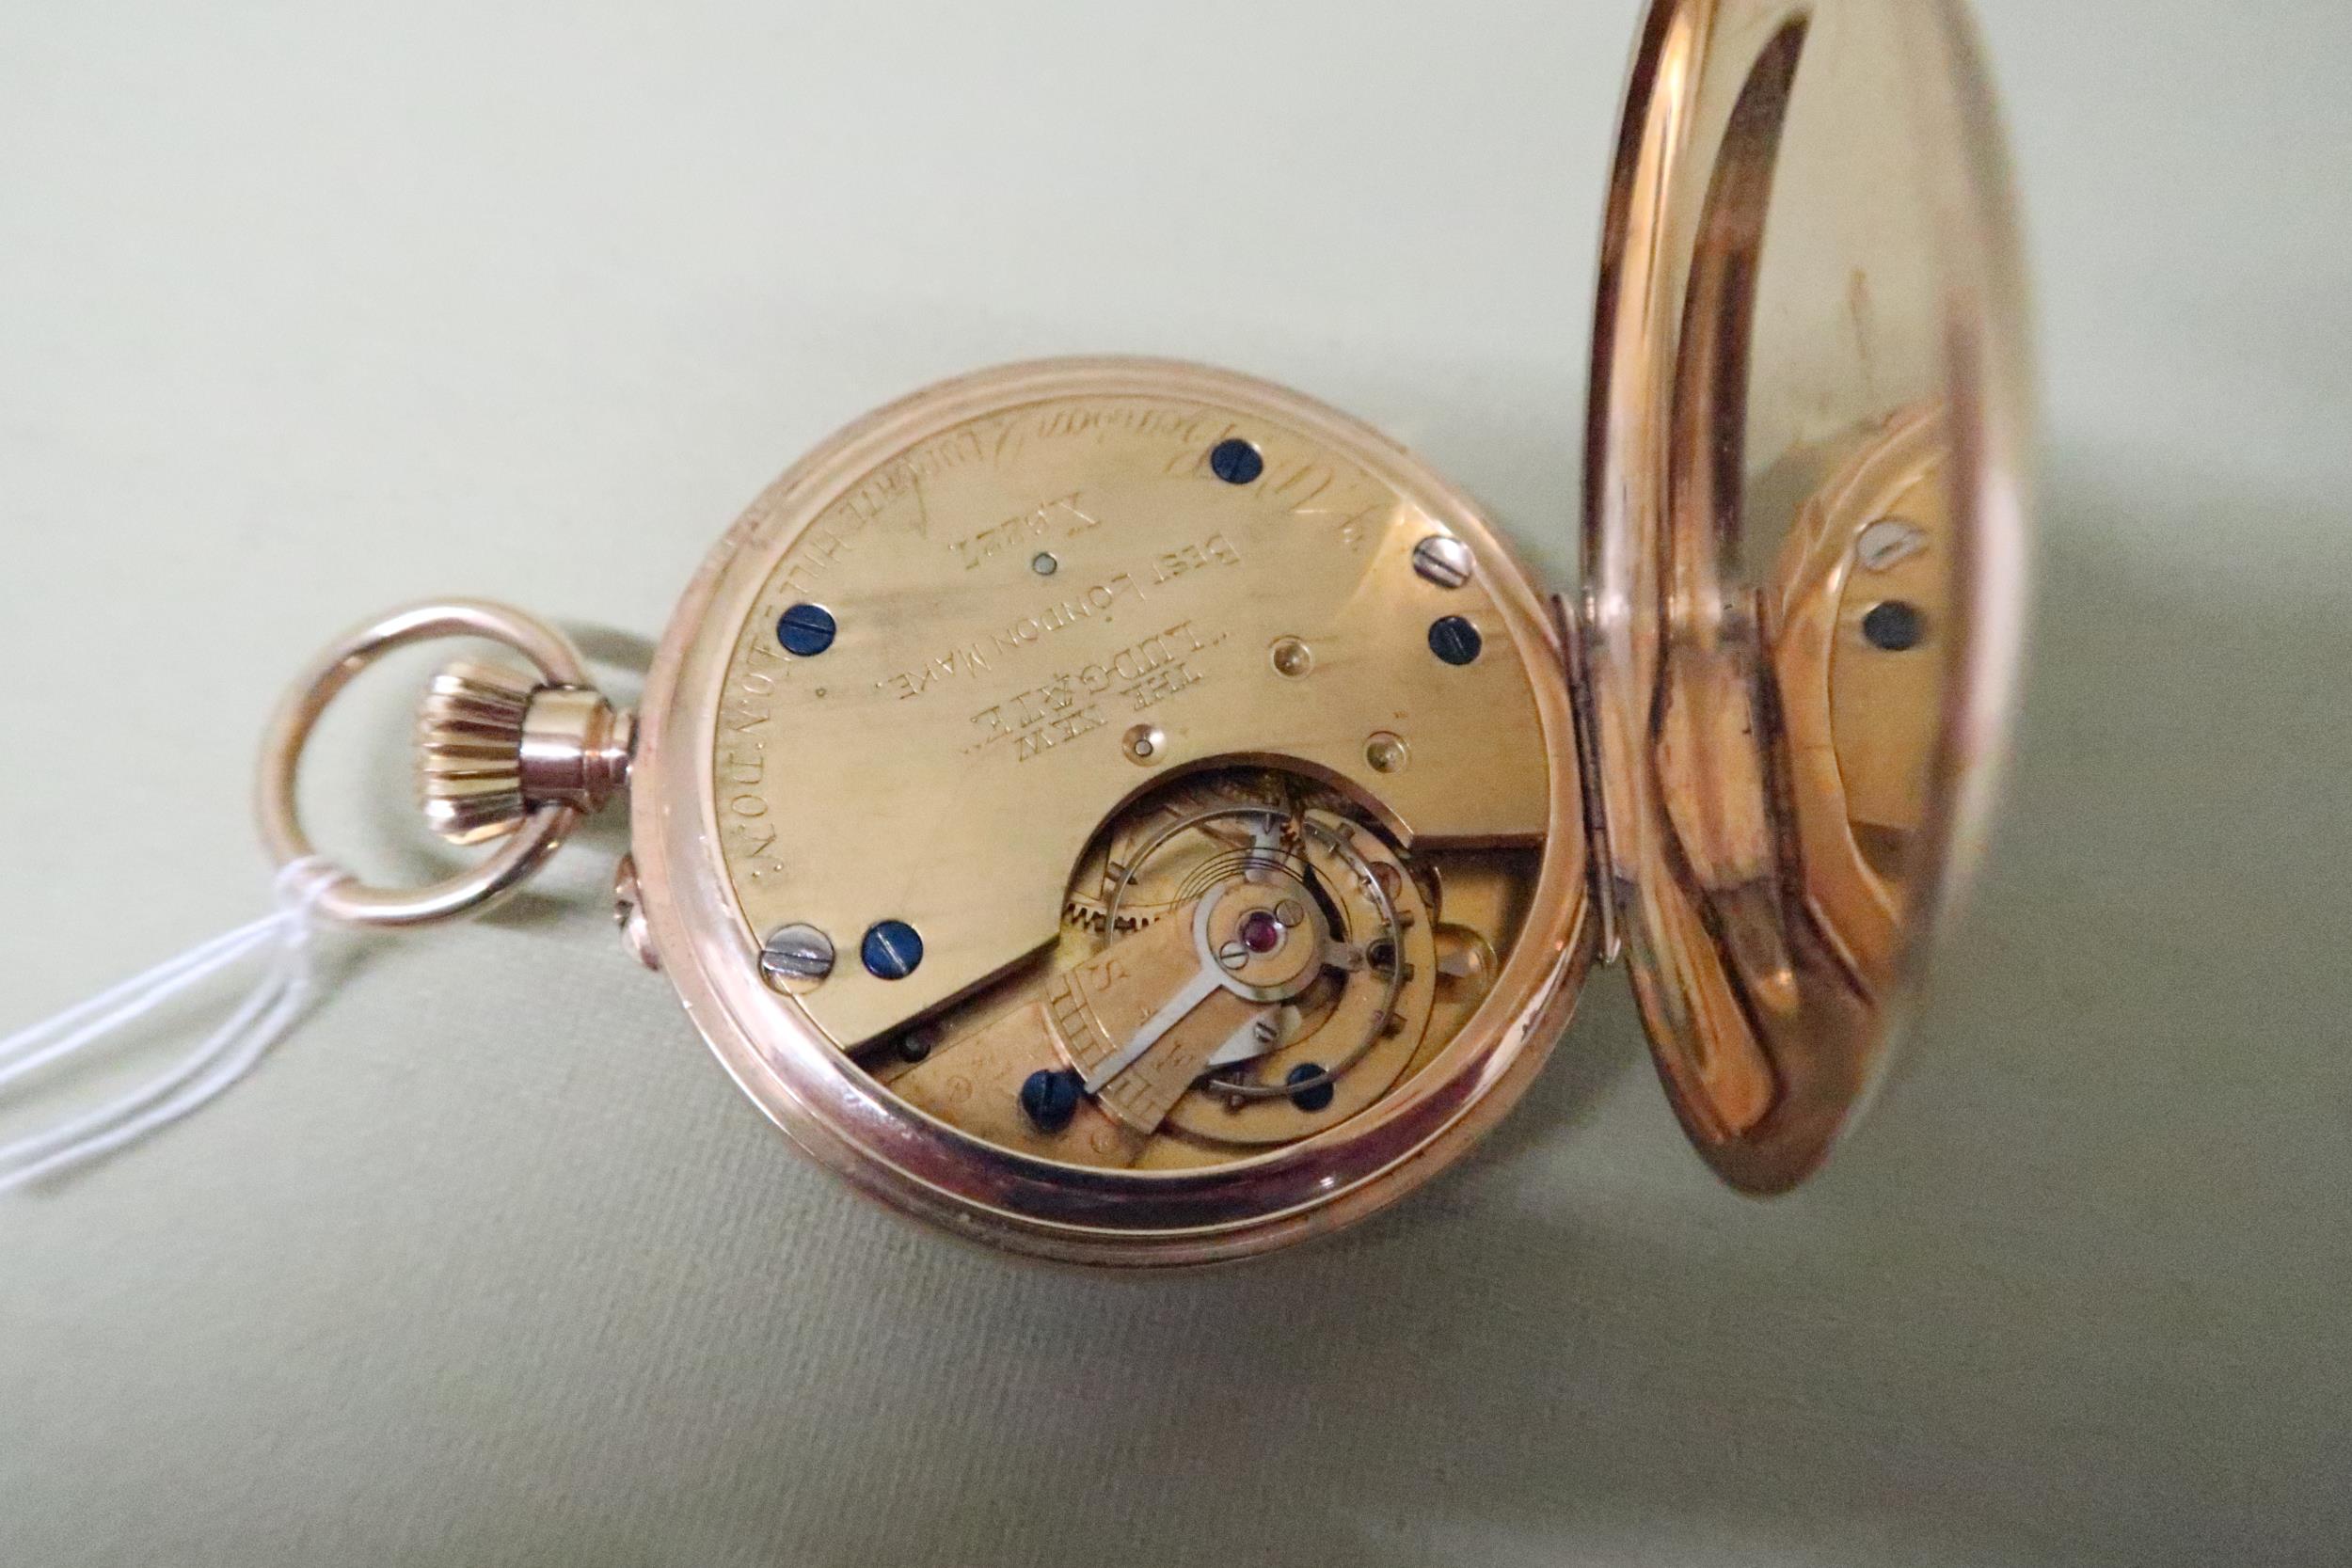 A 9ct gold pocket watch JW Benson 1873 - Roman numerals X6227 The New Ludgate - subsidiary seconds - Image 2 of 3